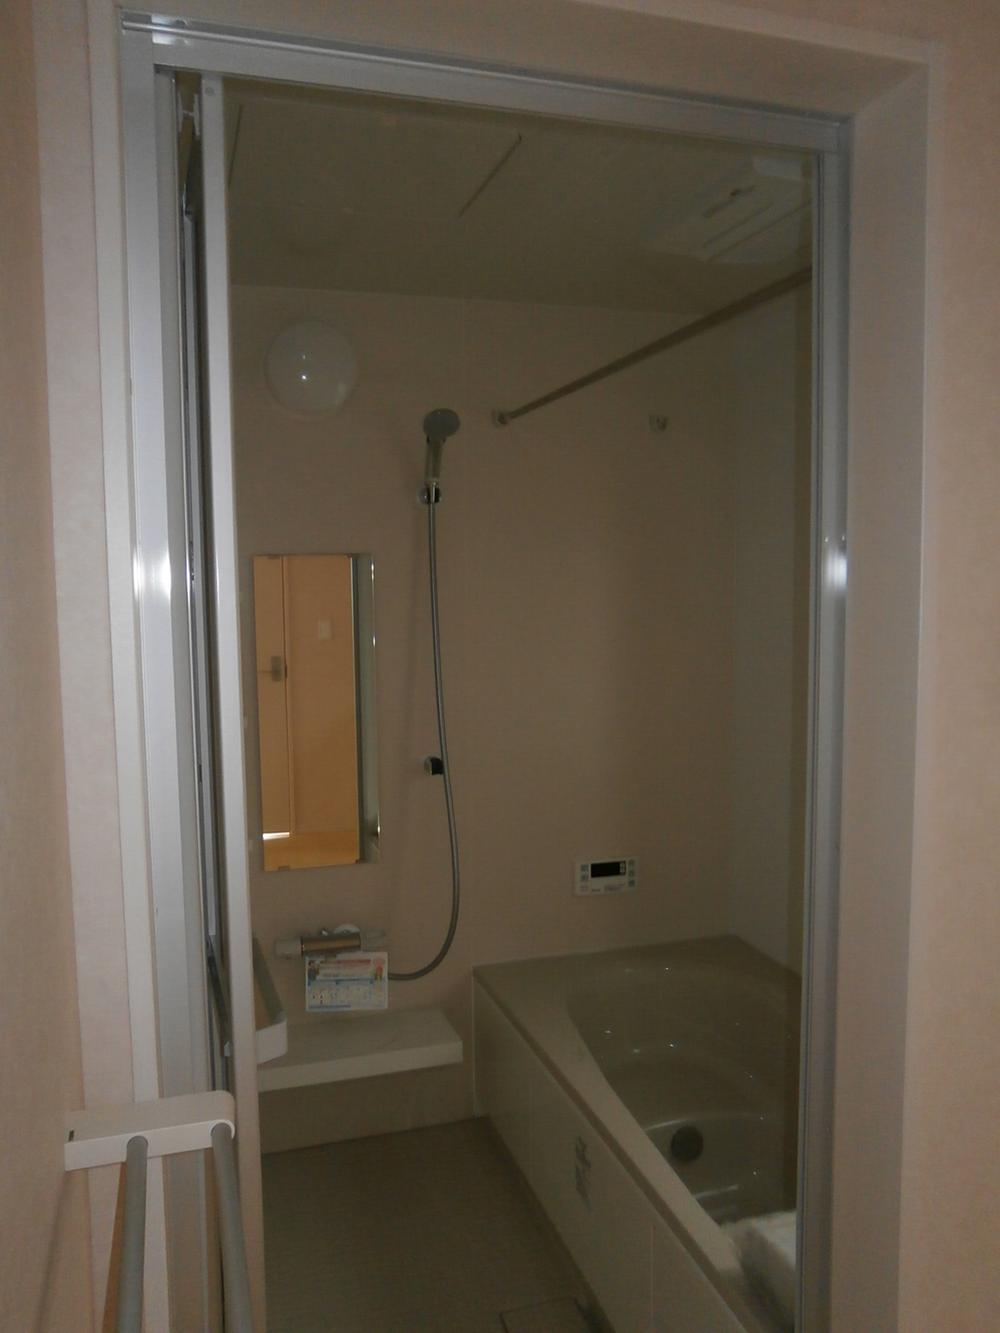 Bathroom. 1 pyeong type of system bus (local September 1, 2013 shooting)